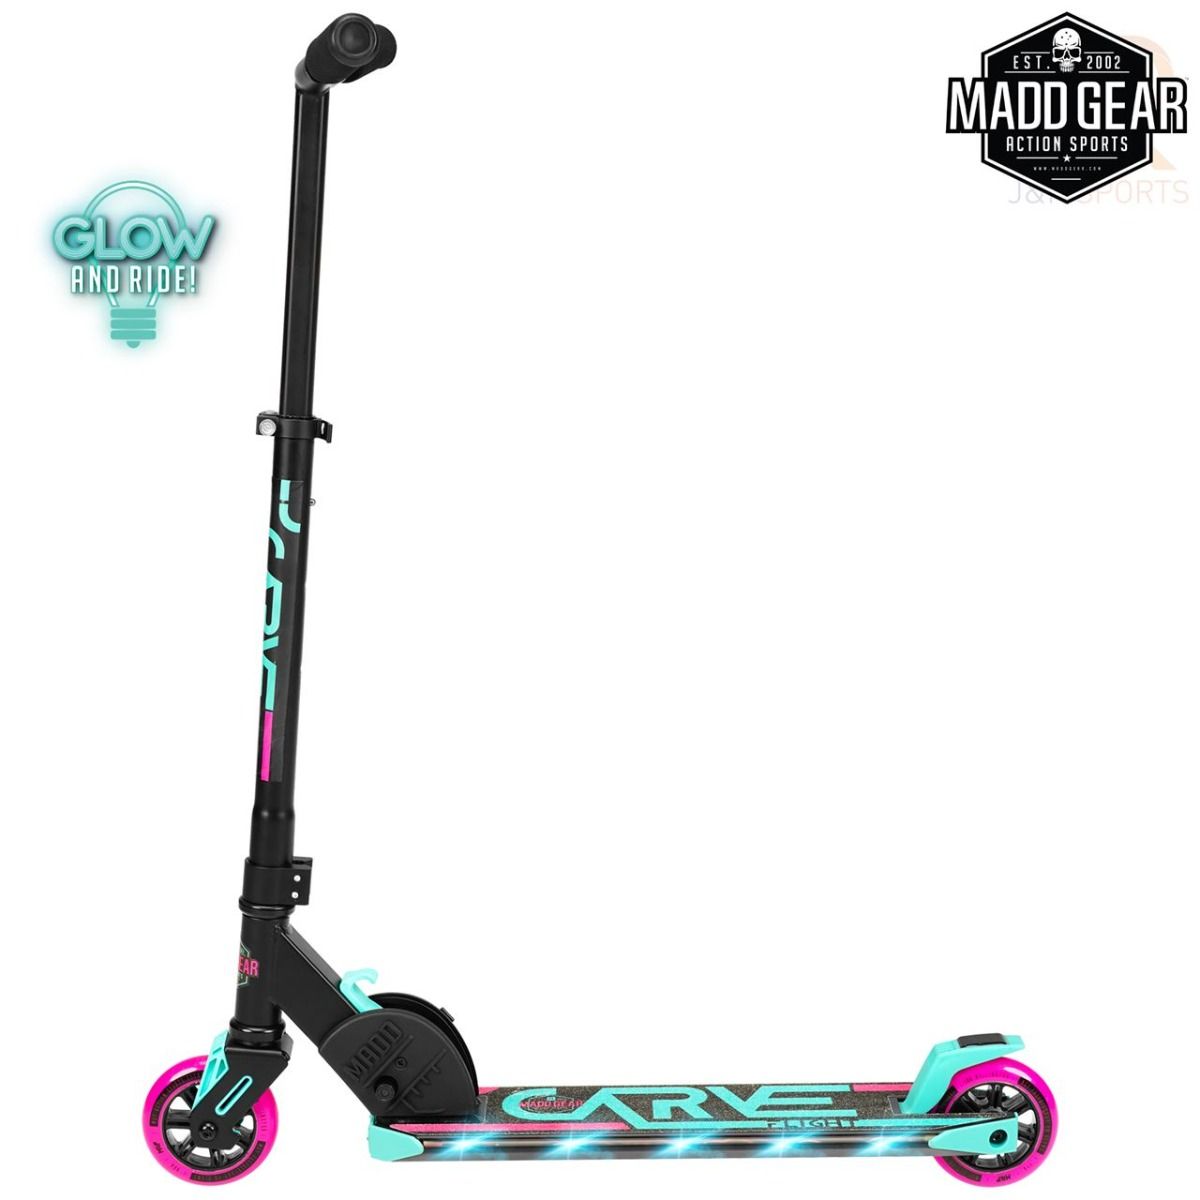 Madd Gear Carve Flight Recreational Scooter Teal Pink 